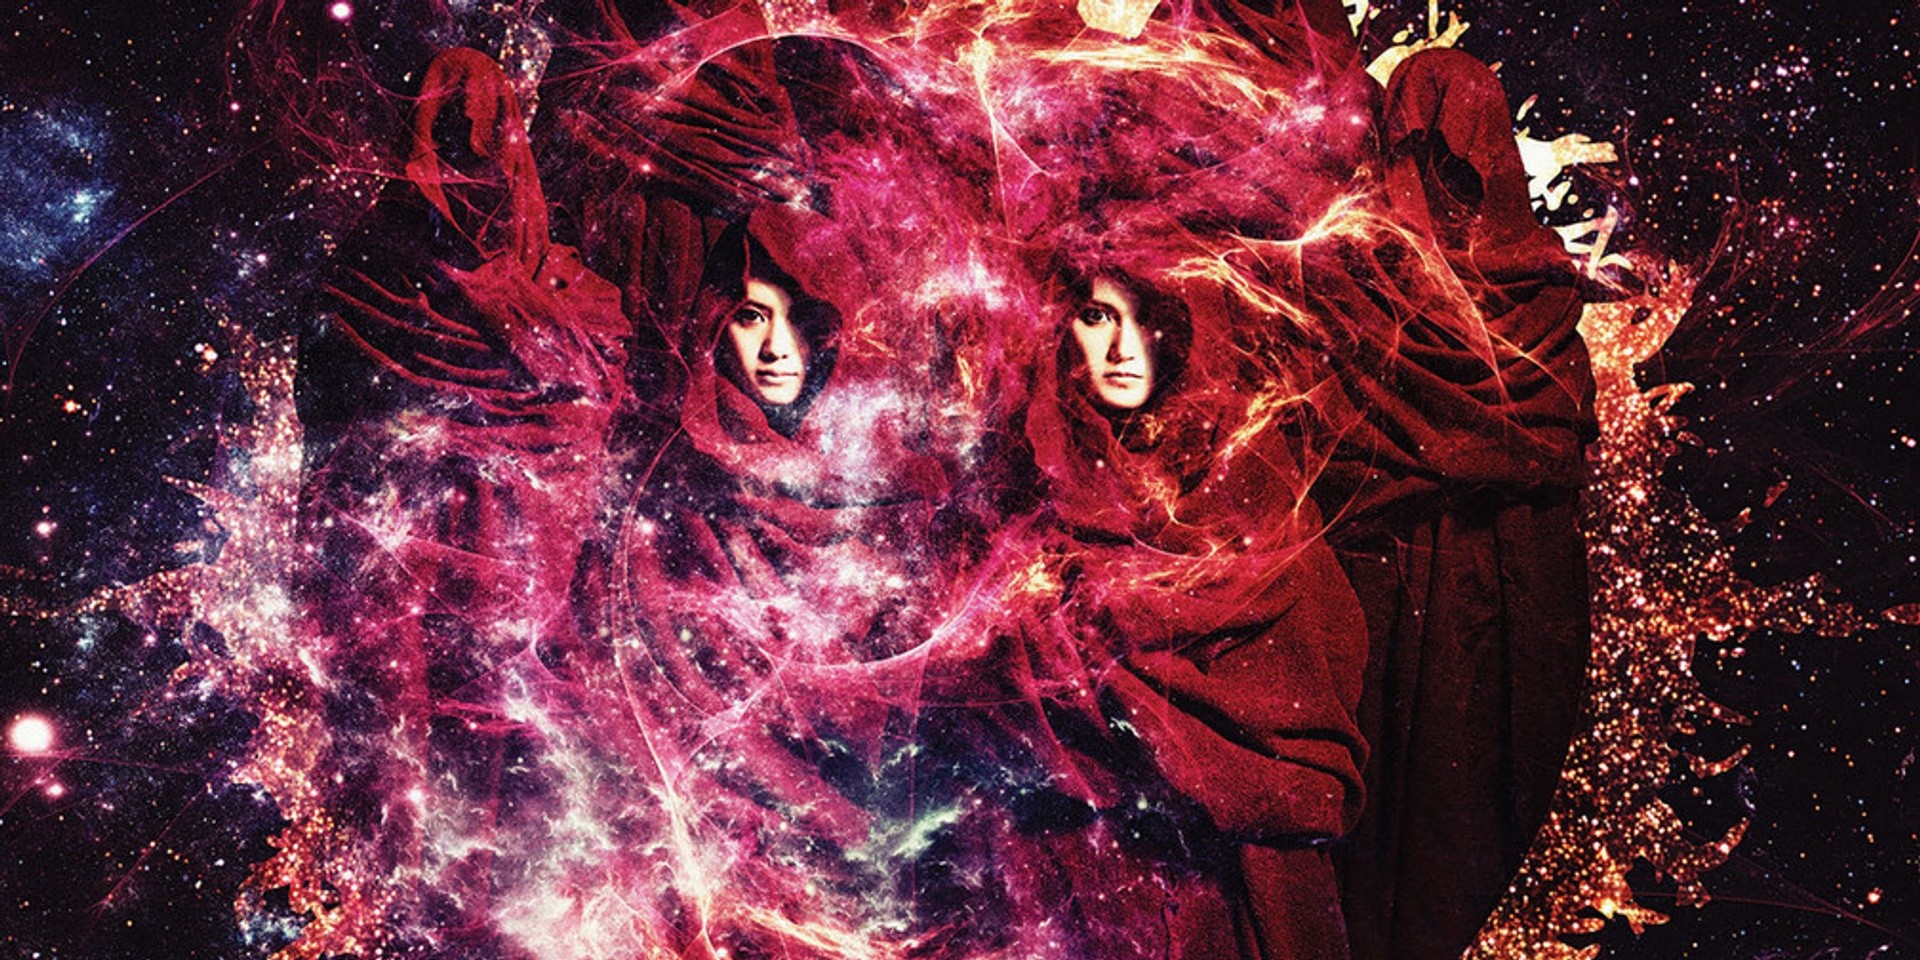 BABYMETAL announces new single 'Elevator Girl' releasing next month and first US arena show